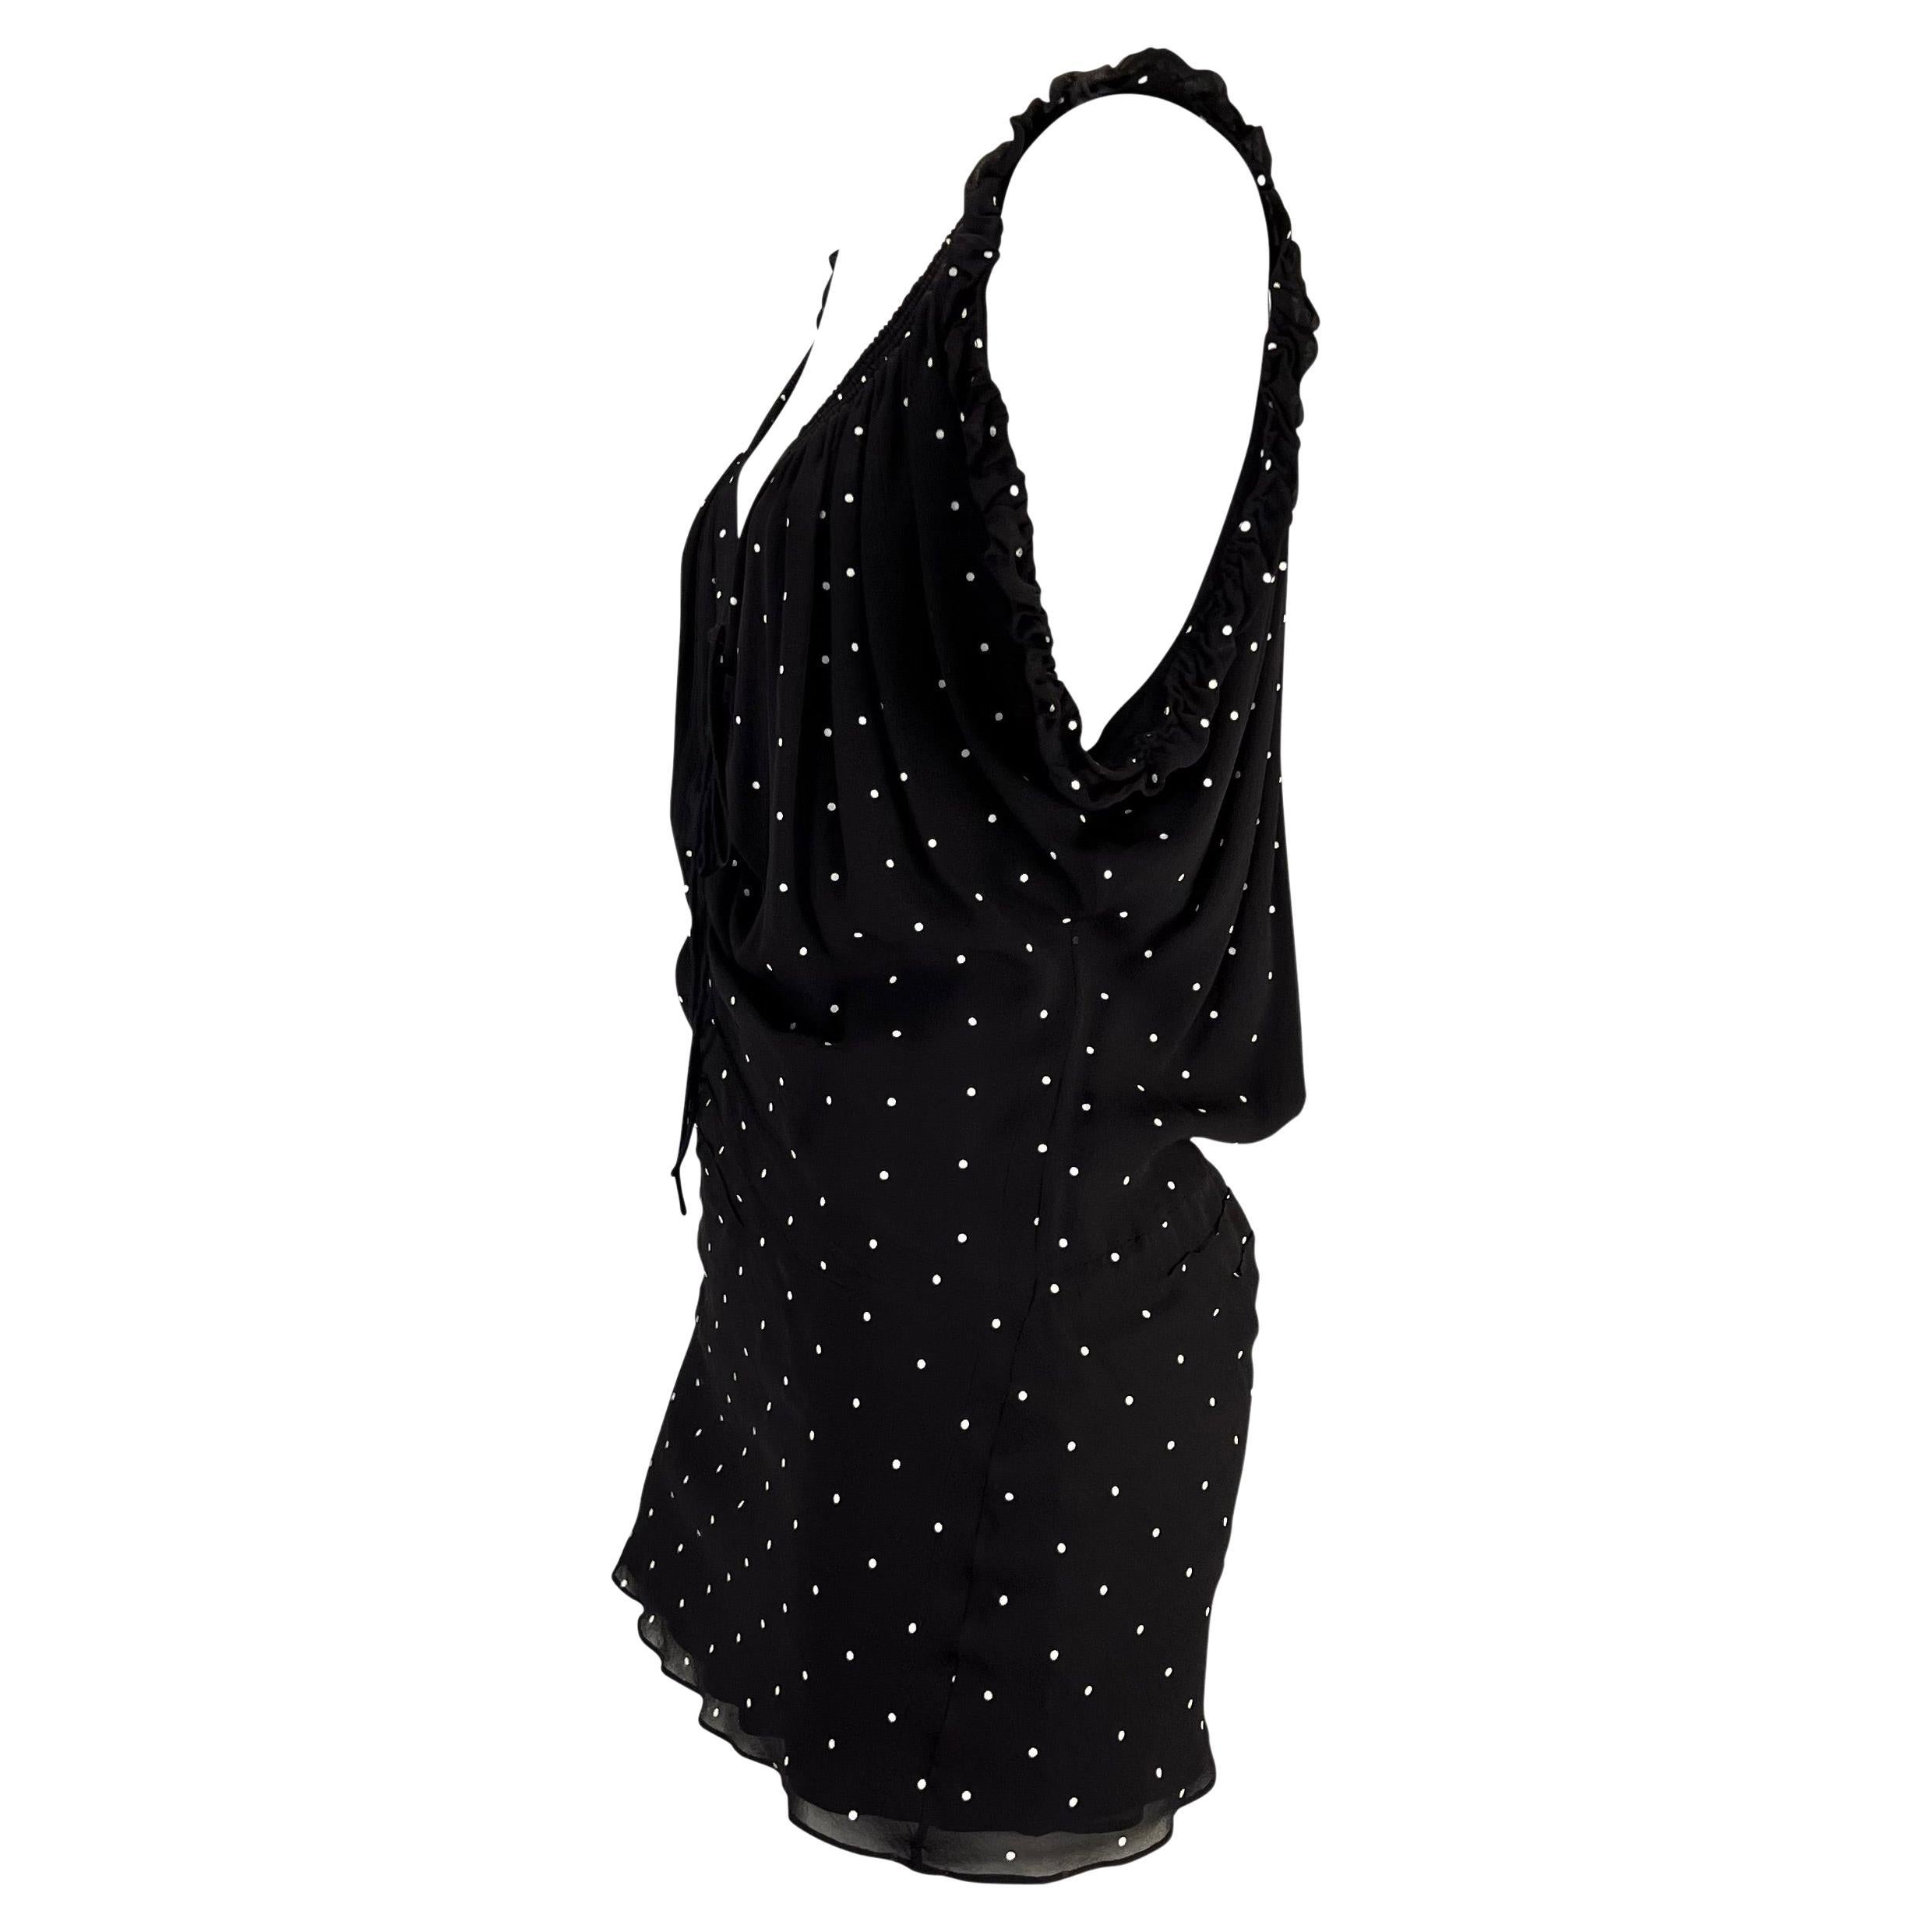 S/S 2003 Gucci by Tom Ford Black Silk Polka Dot Lace-Up Ruffle Mini Dress In Excellent Condition For Sale In West Hollywood, CA